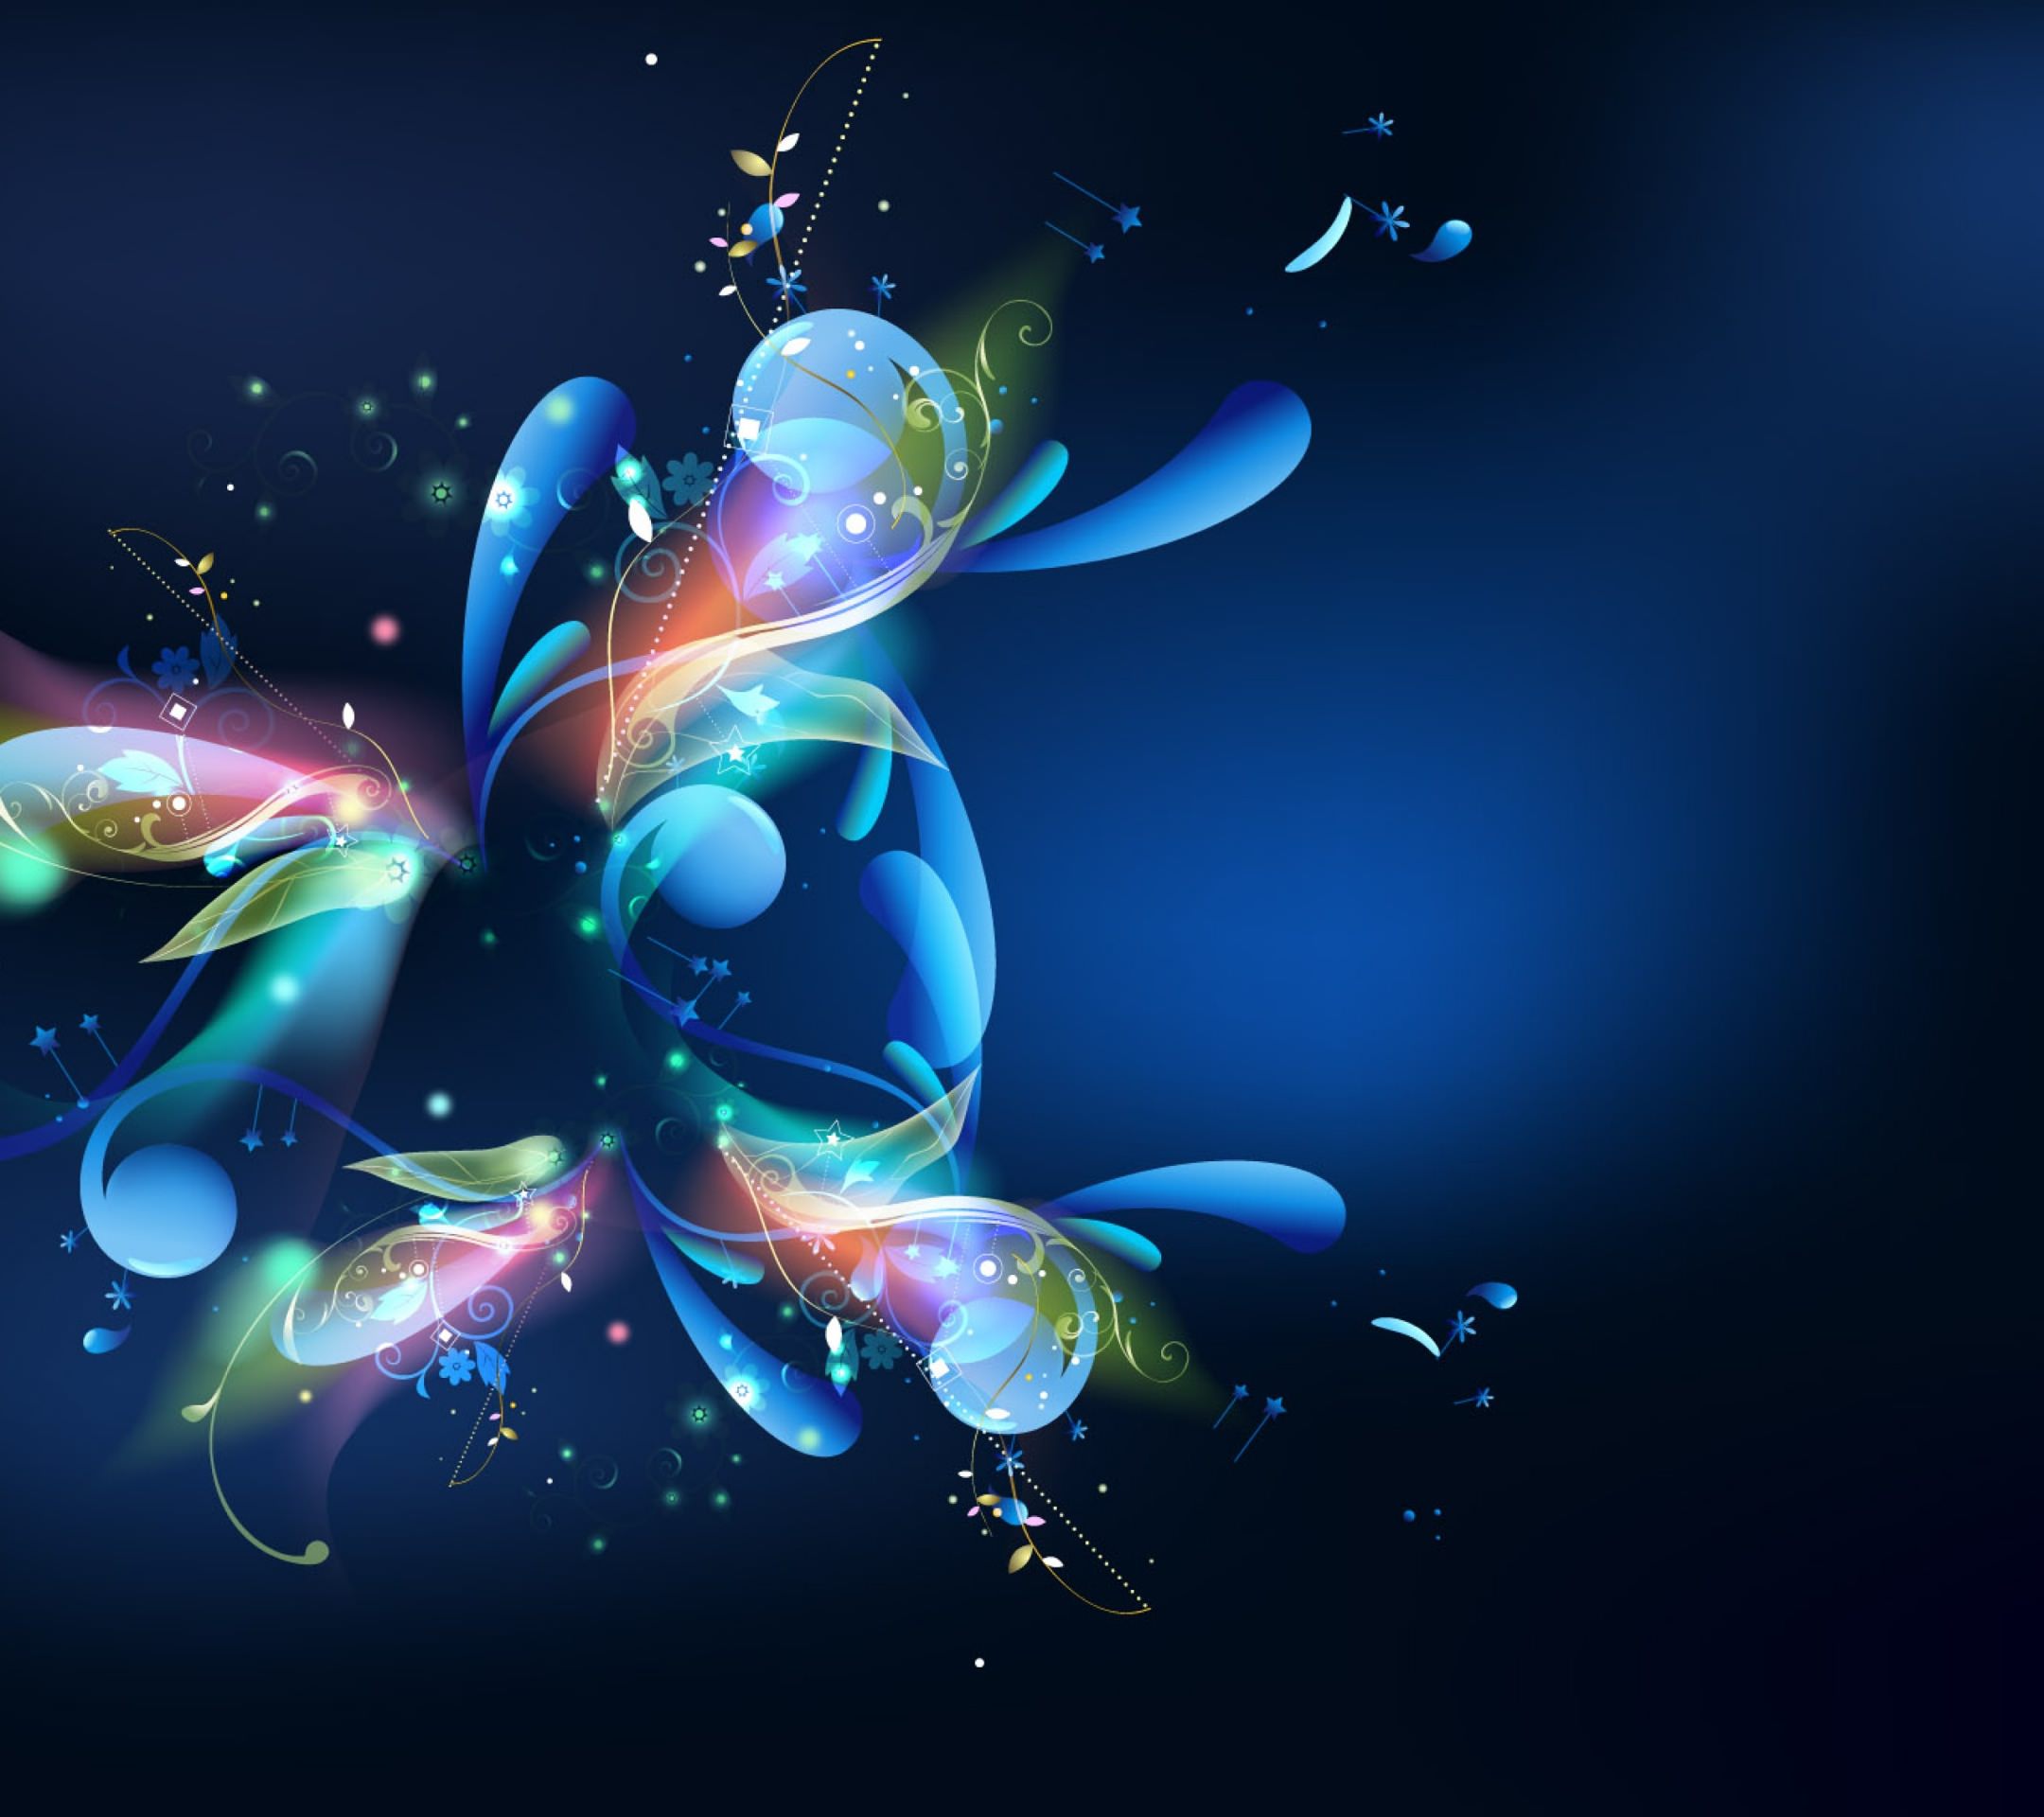 Cool Graphics Blue Colorful | Wallpaper.sc SmartPhone